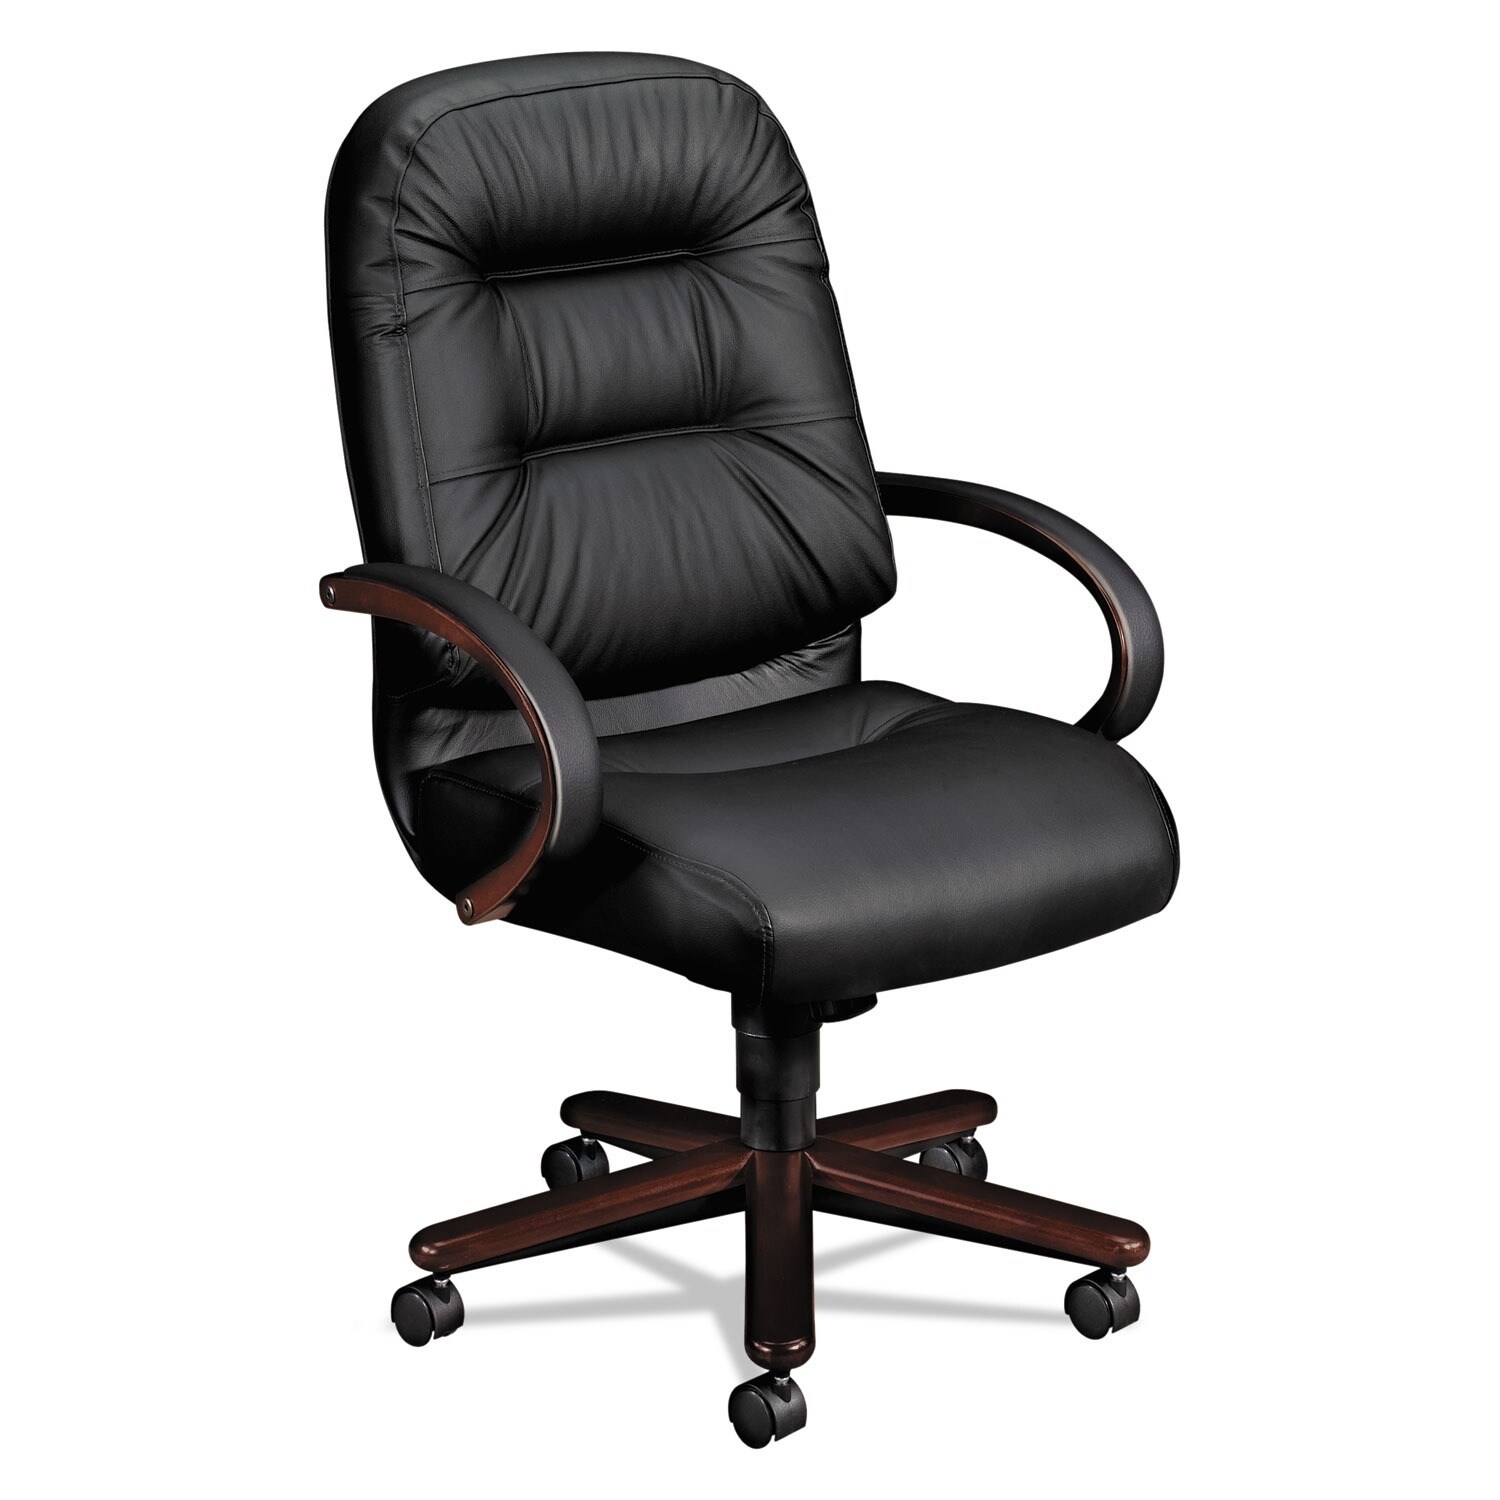 Shop Hon Pillow Soft Executive High Back Leather Chair Free